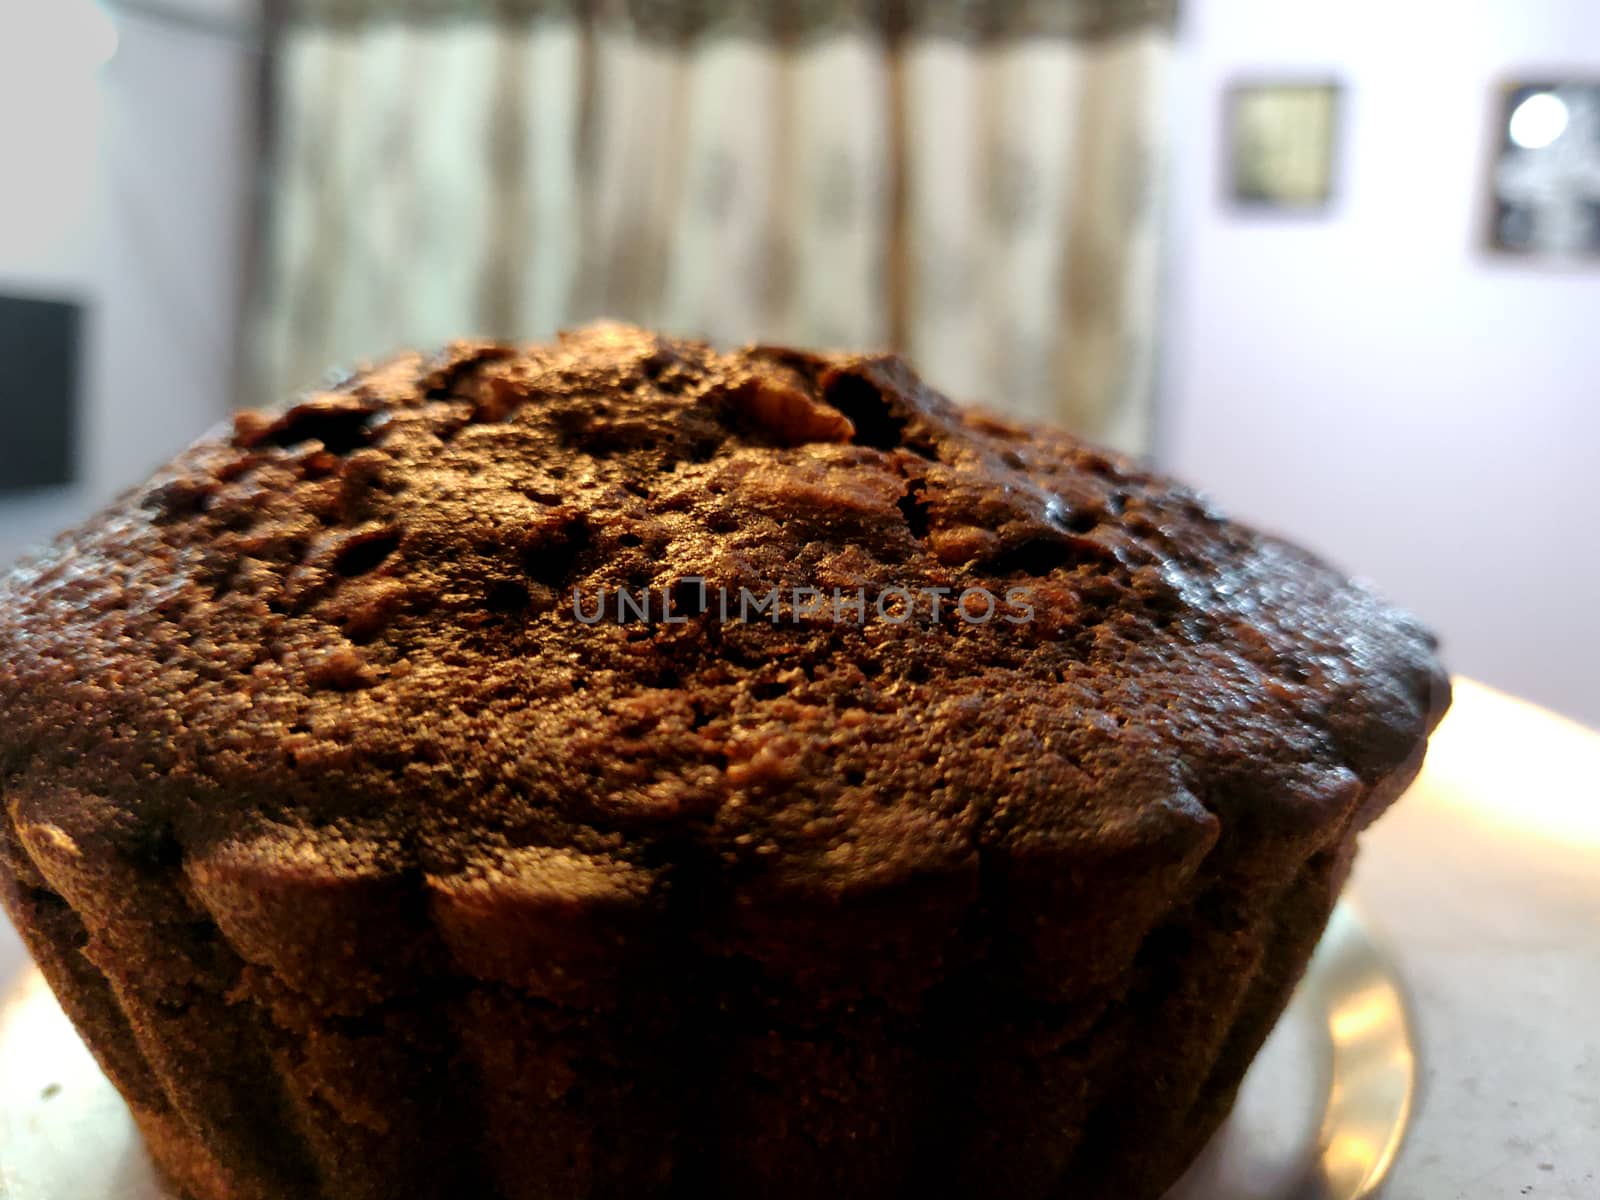 A close up of chocolate walnut muffin on a steel plate held up in the air